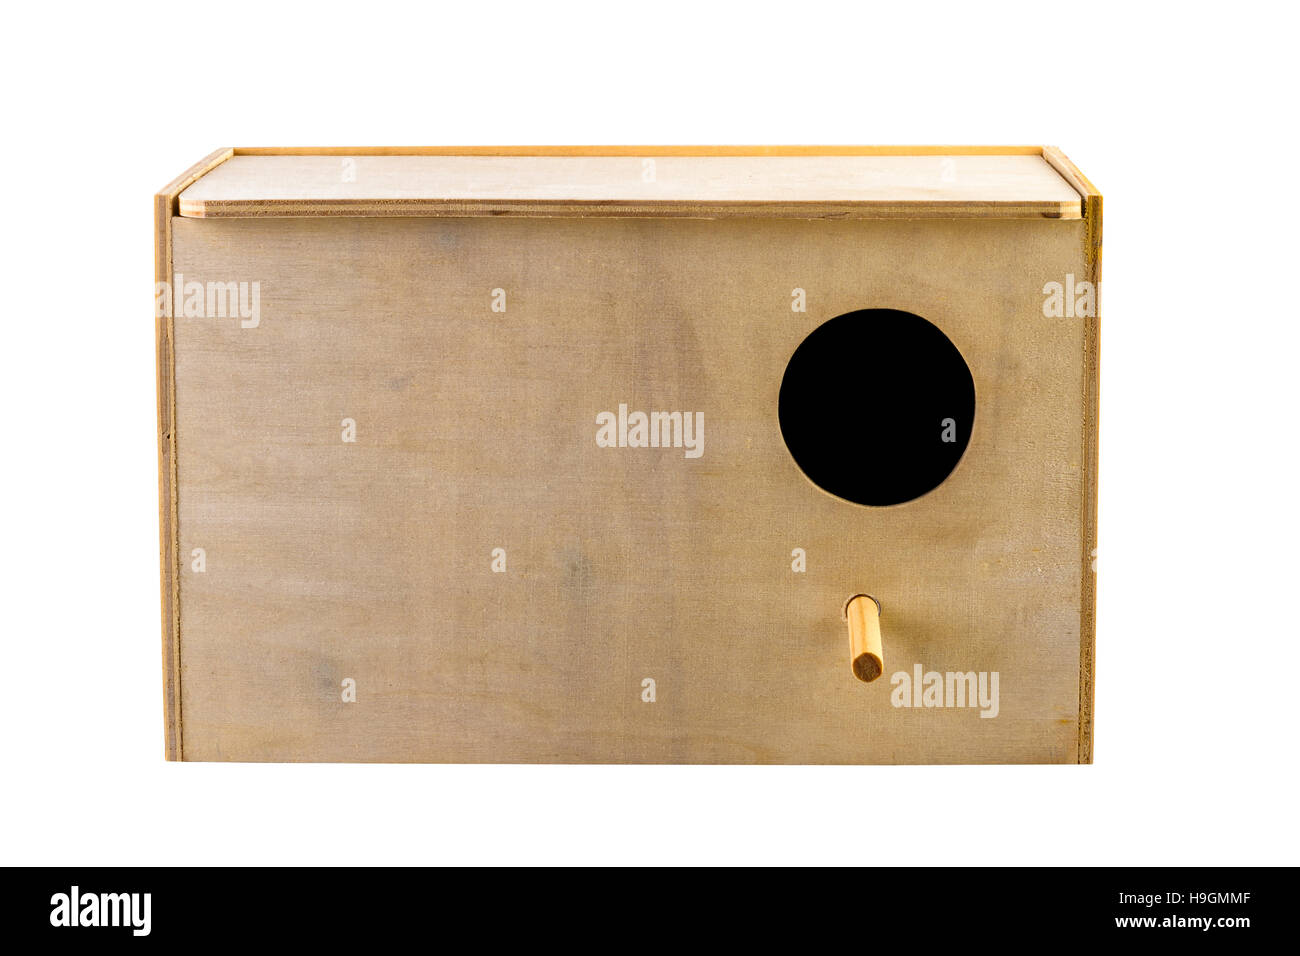 Nest box bird house isolated on white. Image included clipping path. Stock Photo